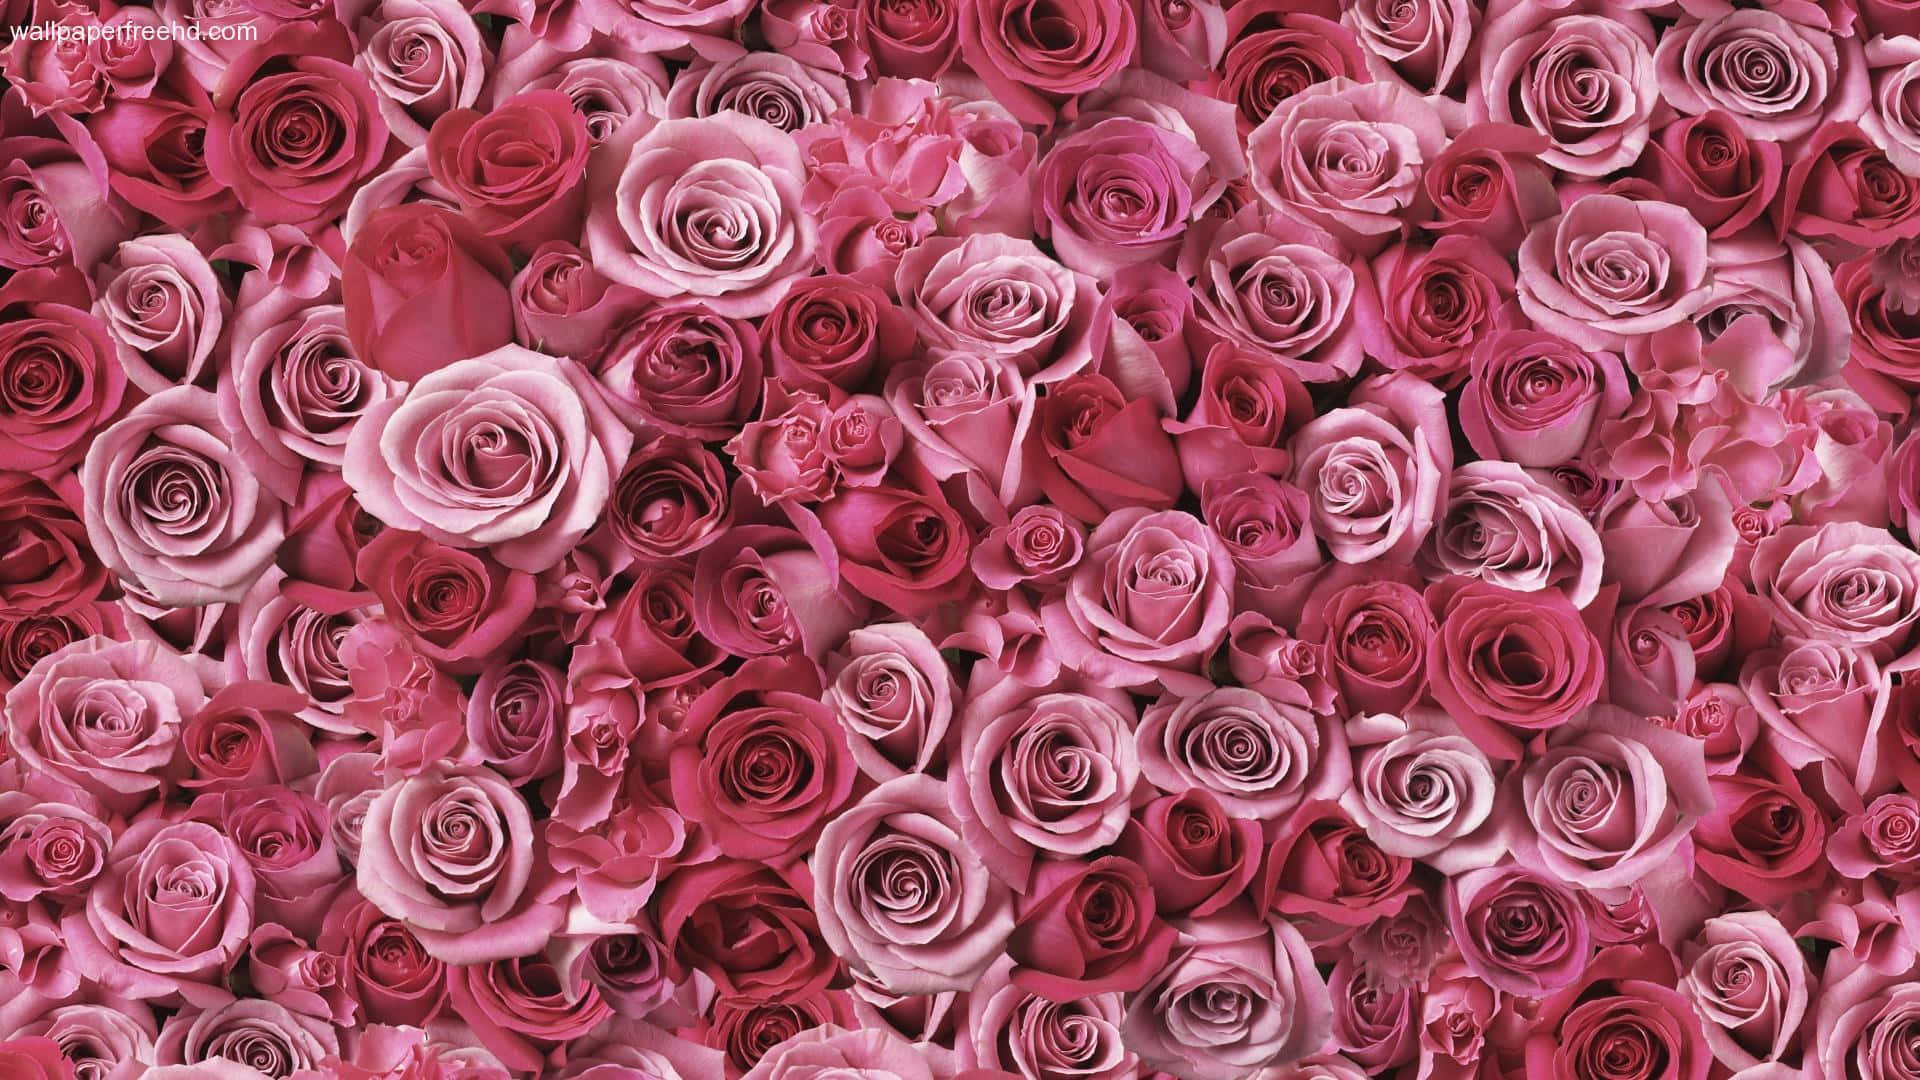 Colourful Bouquet of Roses Wallpaper